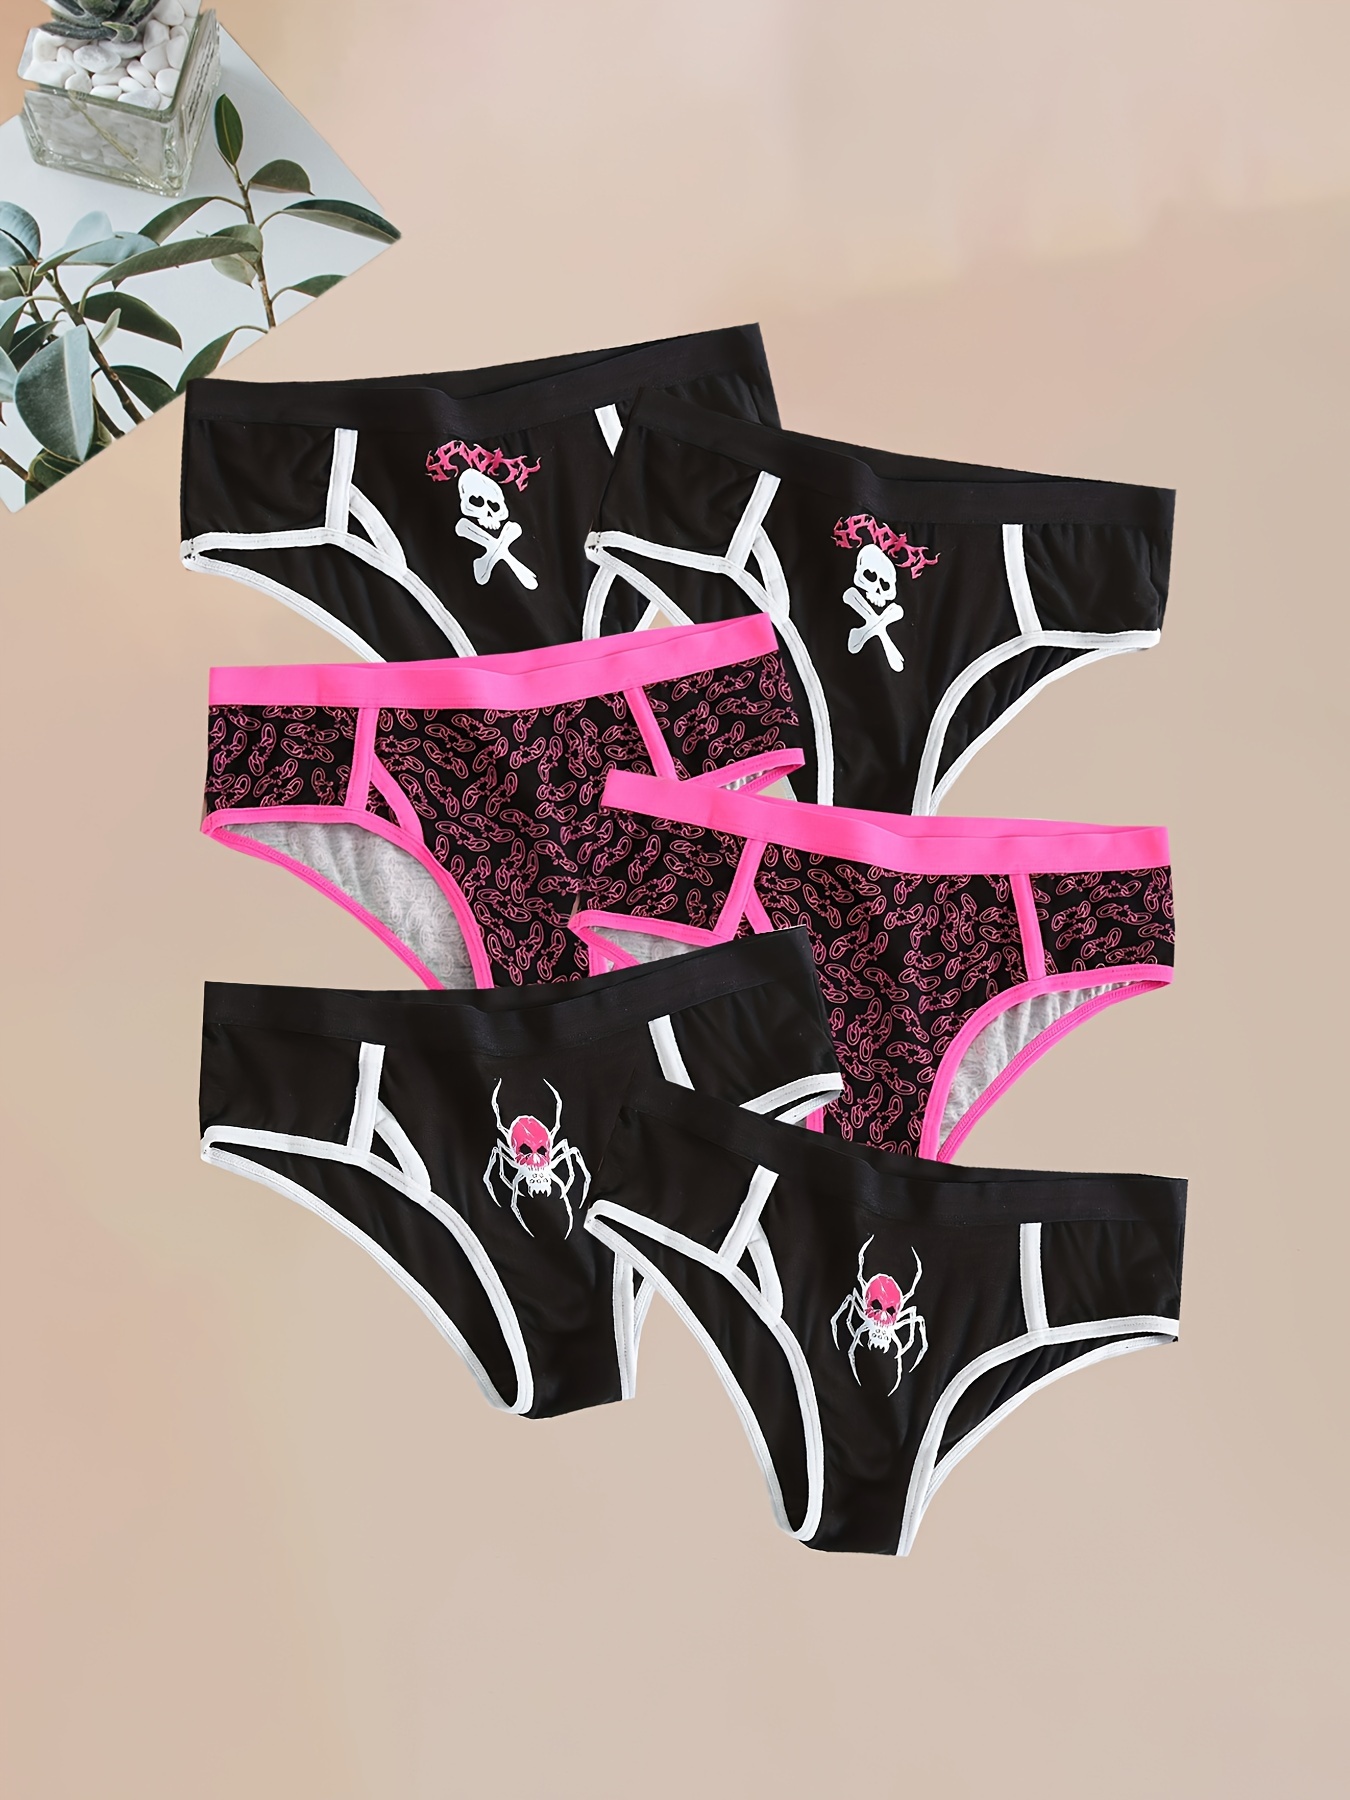 SKULL KNICKERS BRIEFS ONE SIZE SMALL 🇬🇧 GOTHIC PUNK EMO GRUNGE